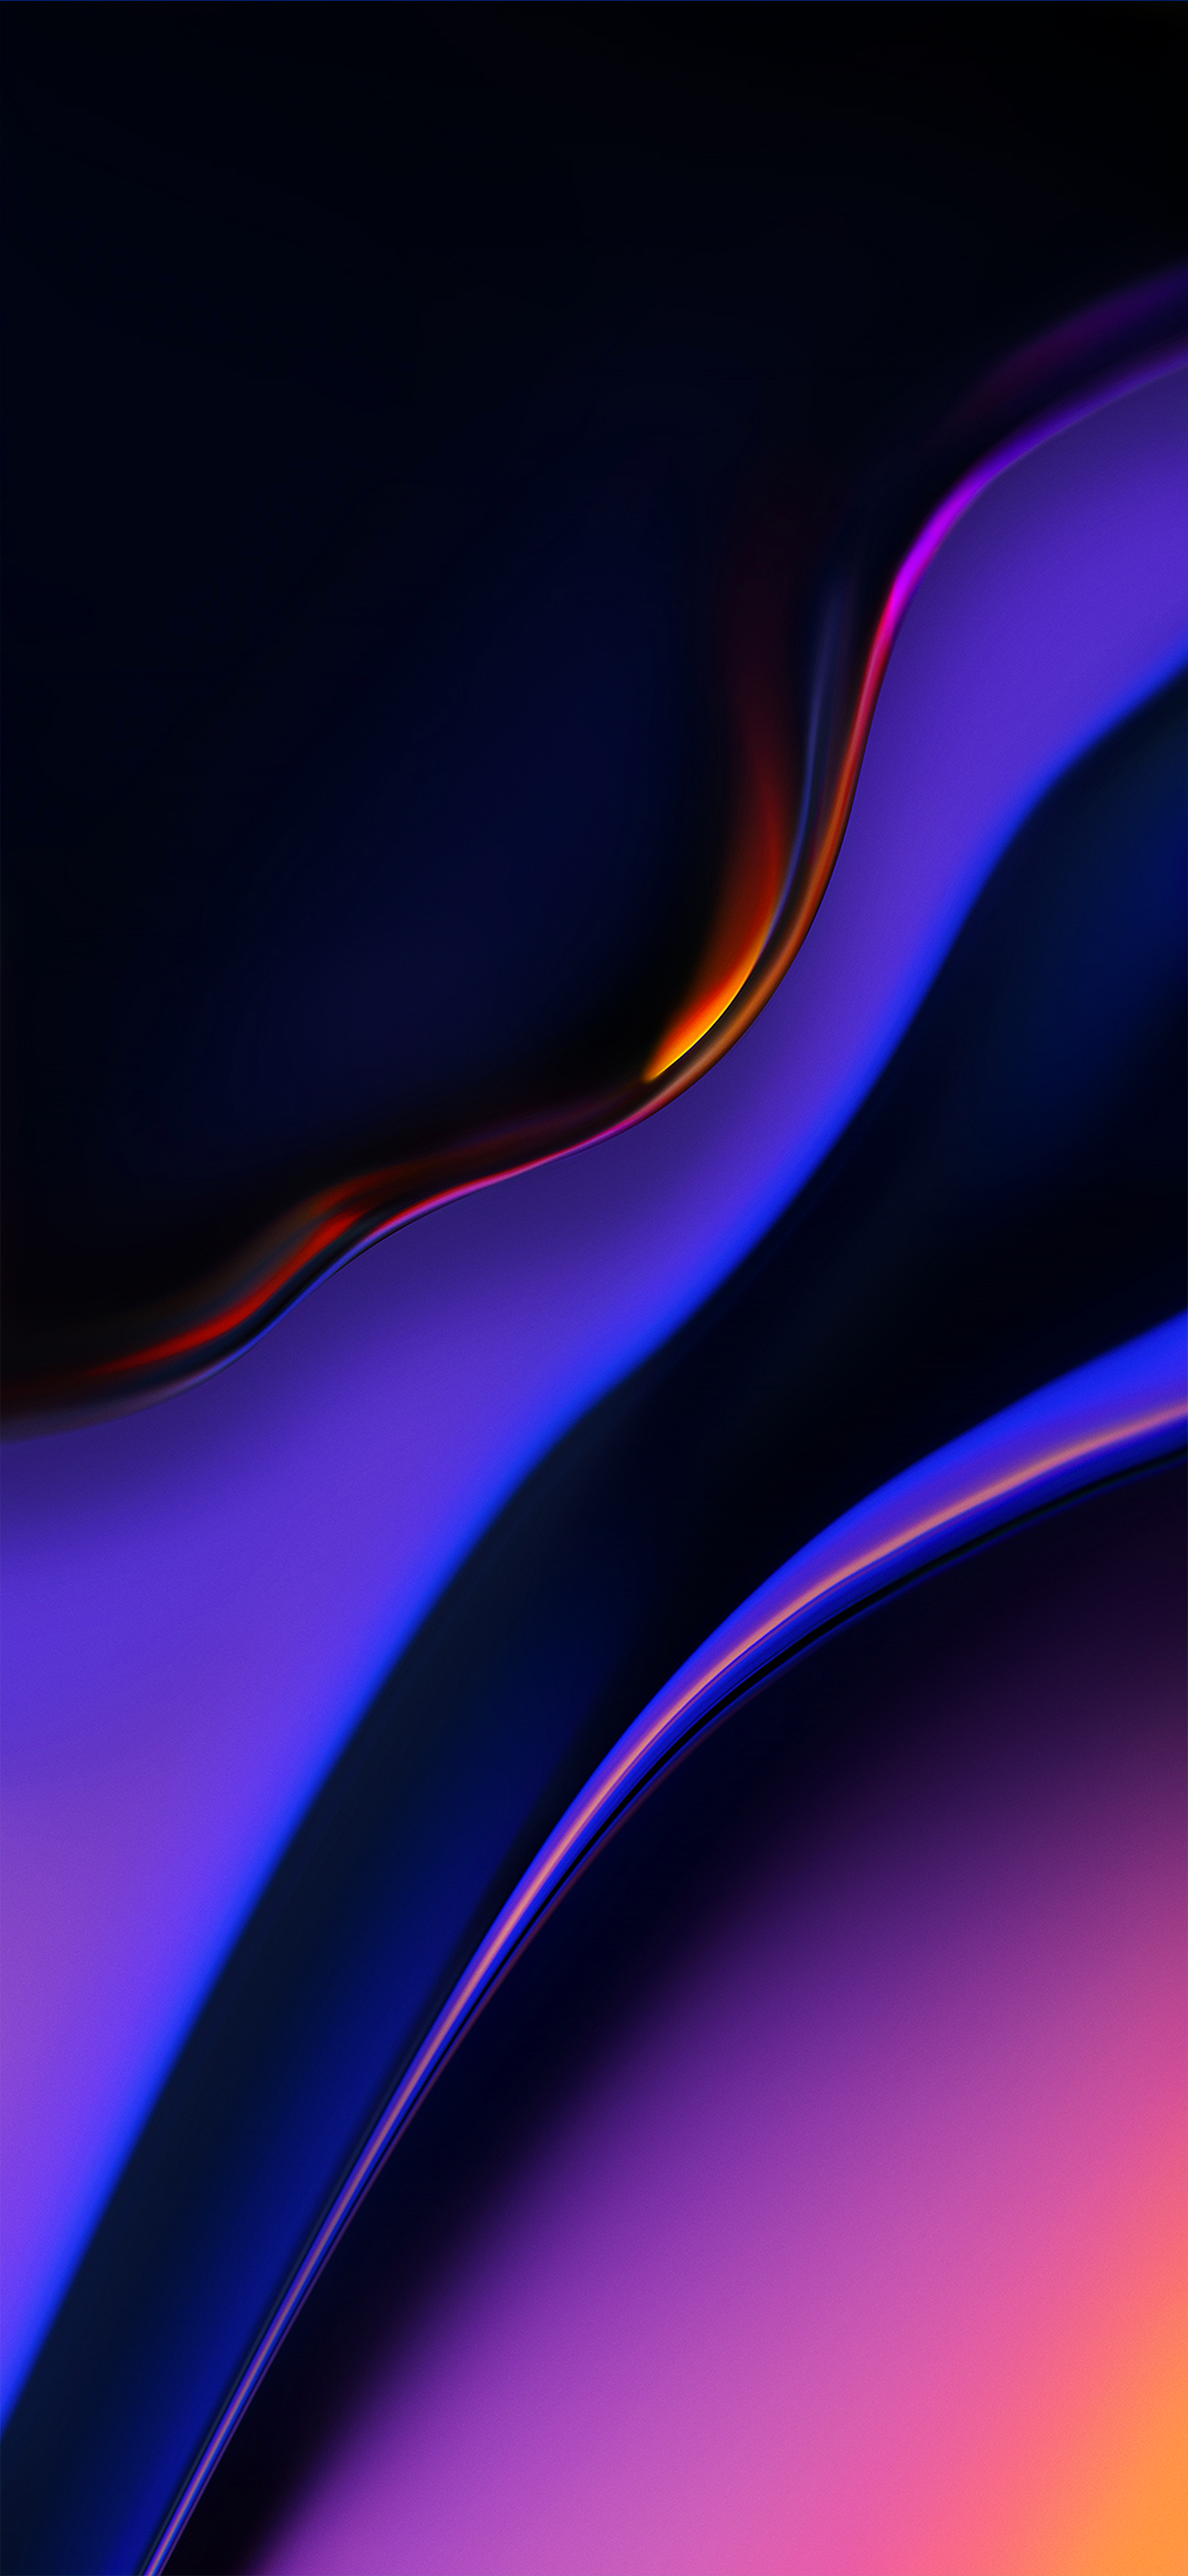 OnePlus 6T Stock Wallpaper - Wallpapers Central